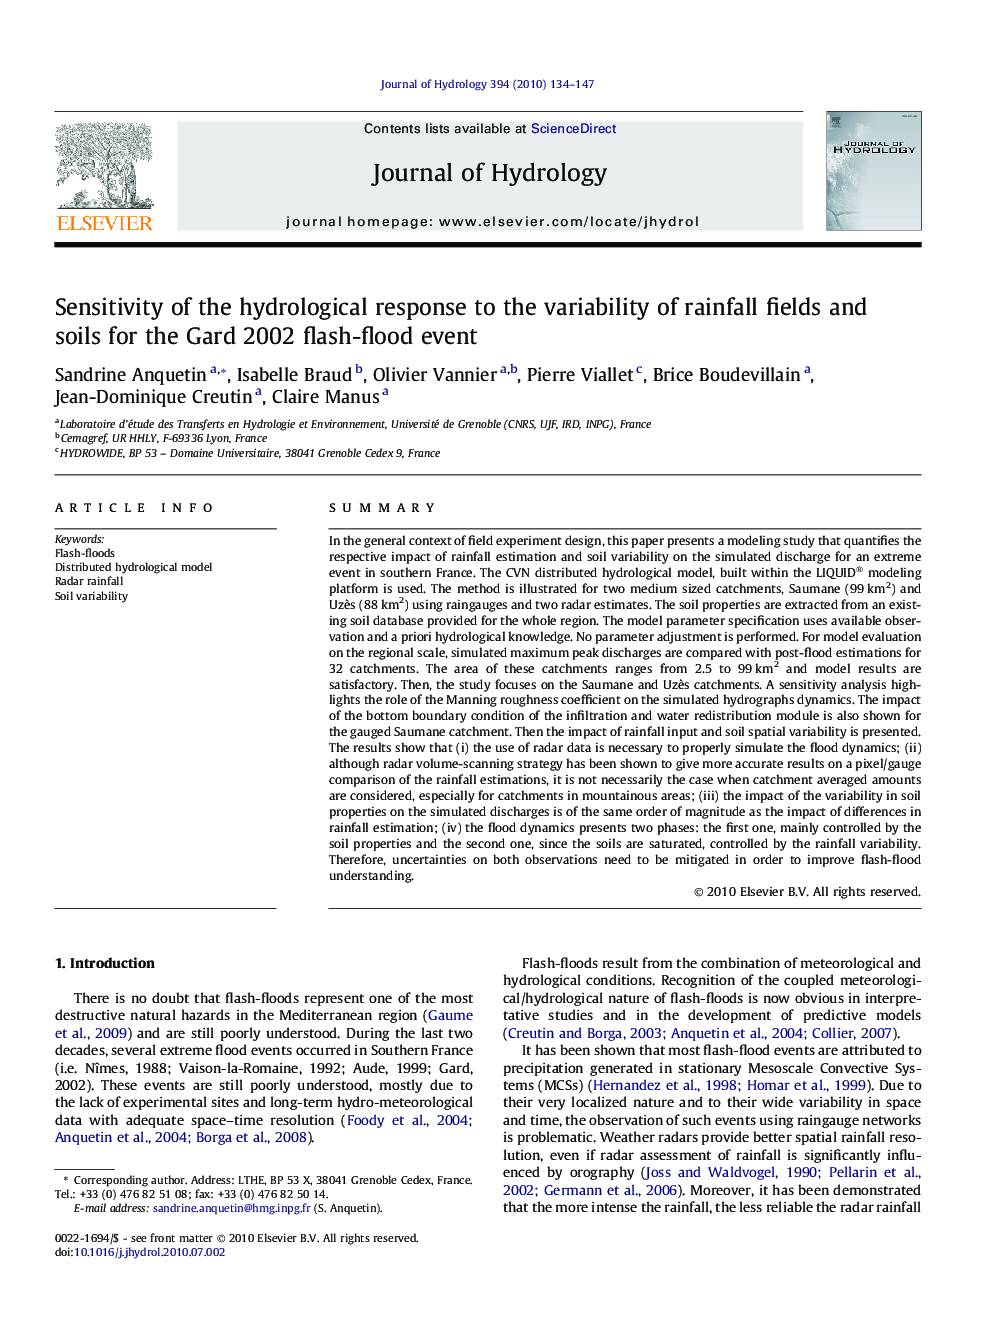 Sensitivity of the hydrological response to the variability of rainfall fields and soils for the Gard 2002 flash-flood event